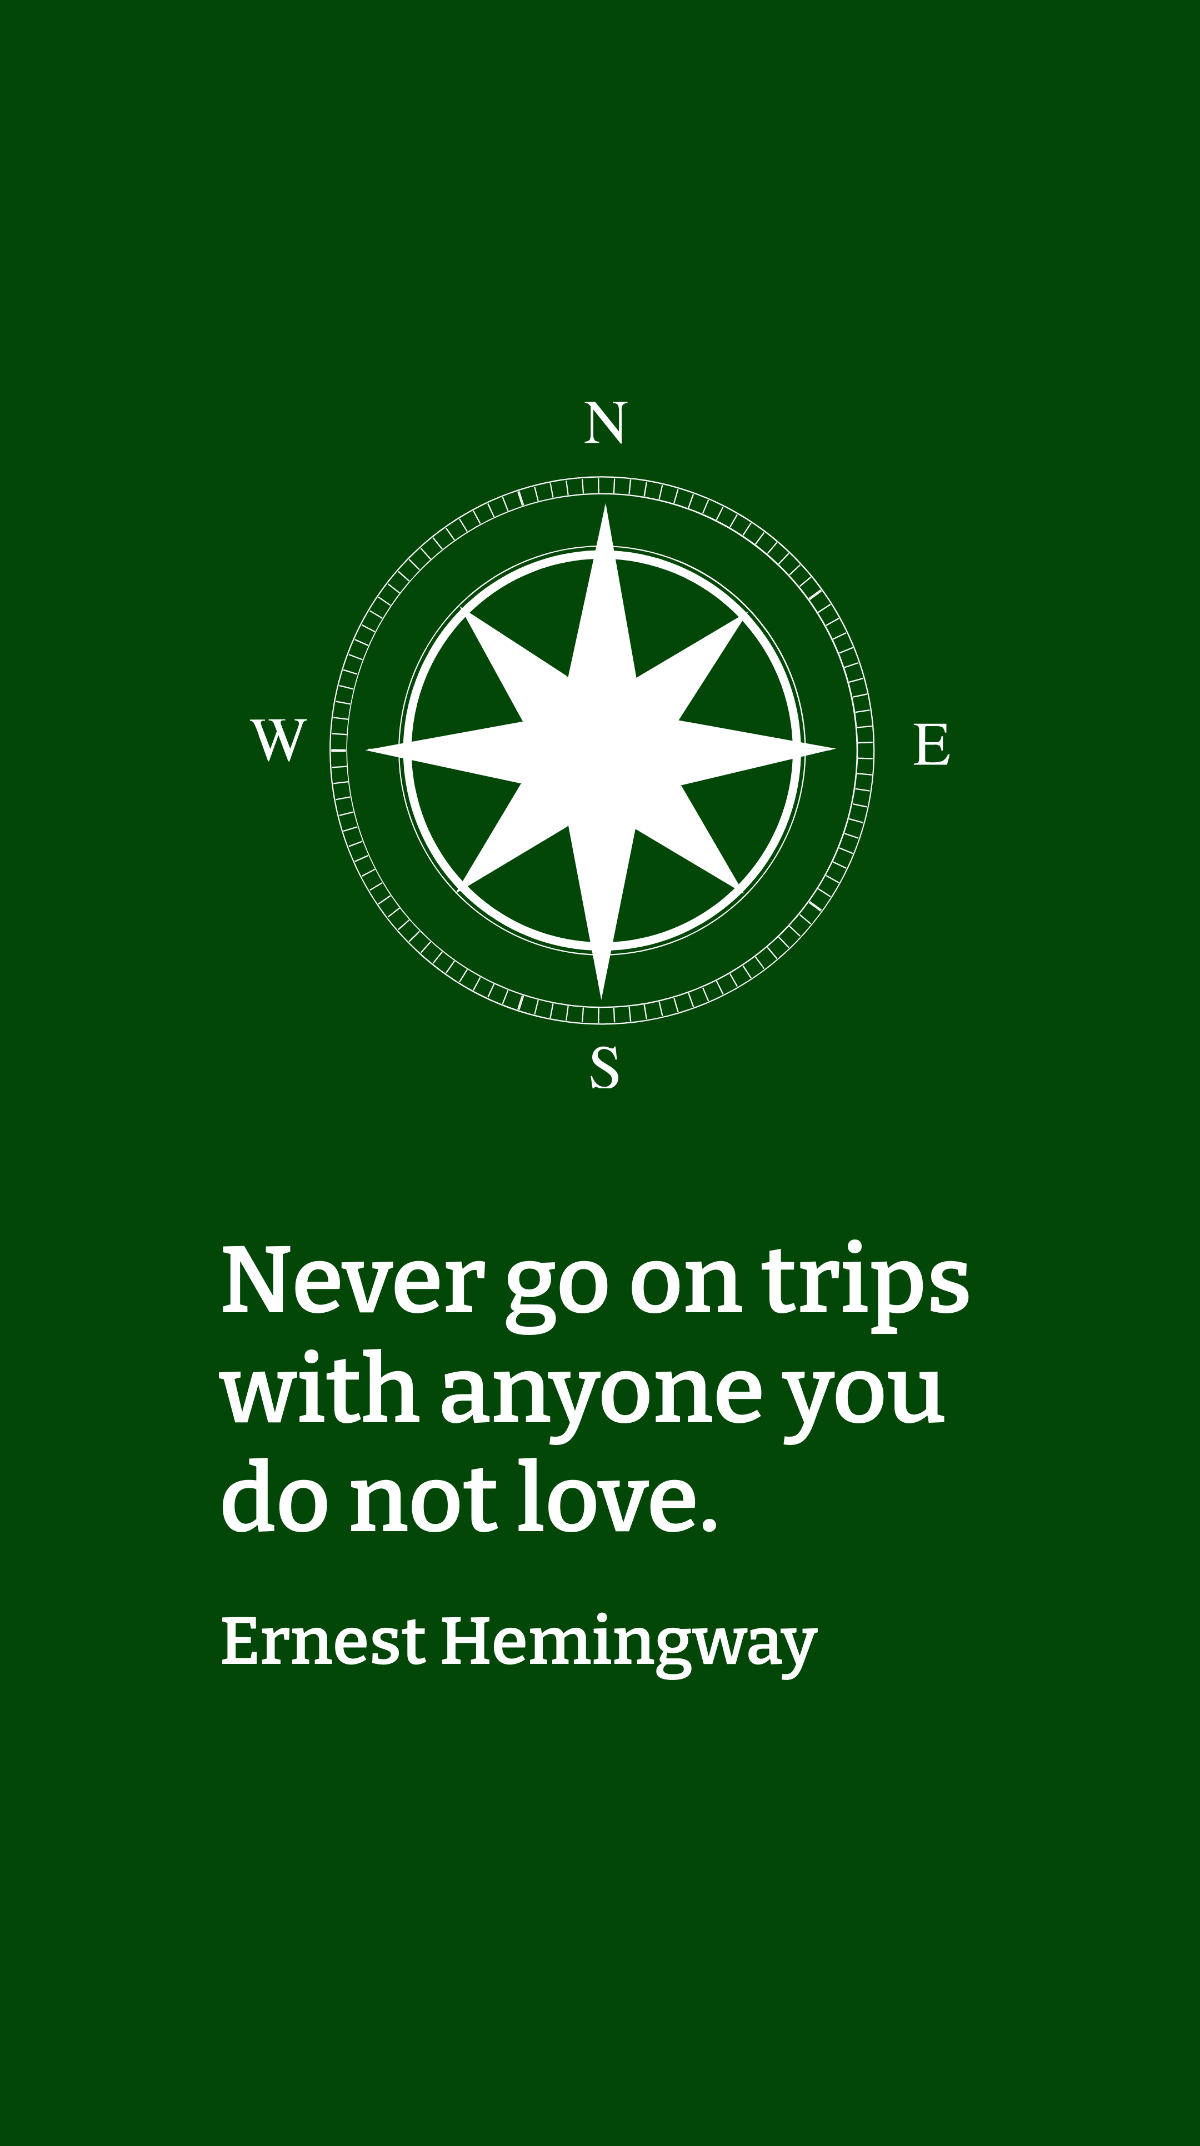 Ernest Hemingway - Never go on trips with anyone you do not love. Template